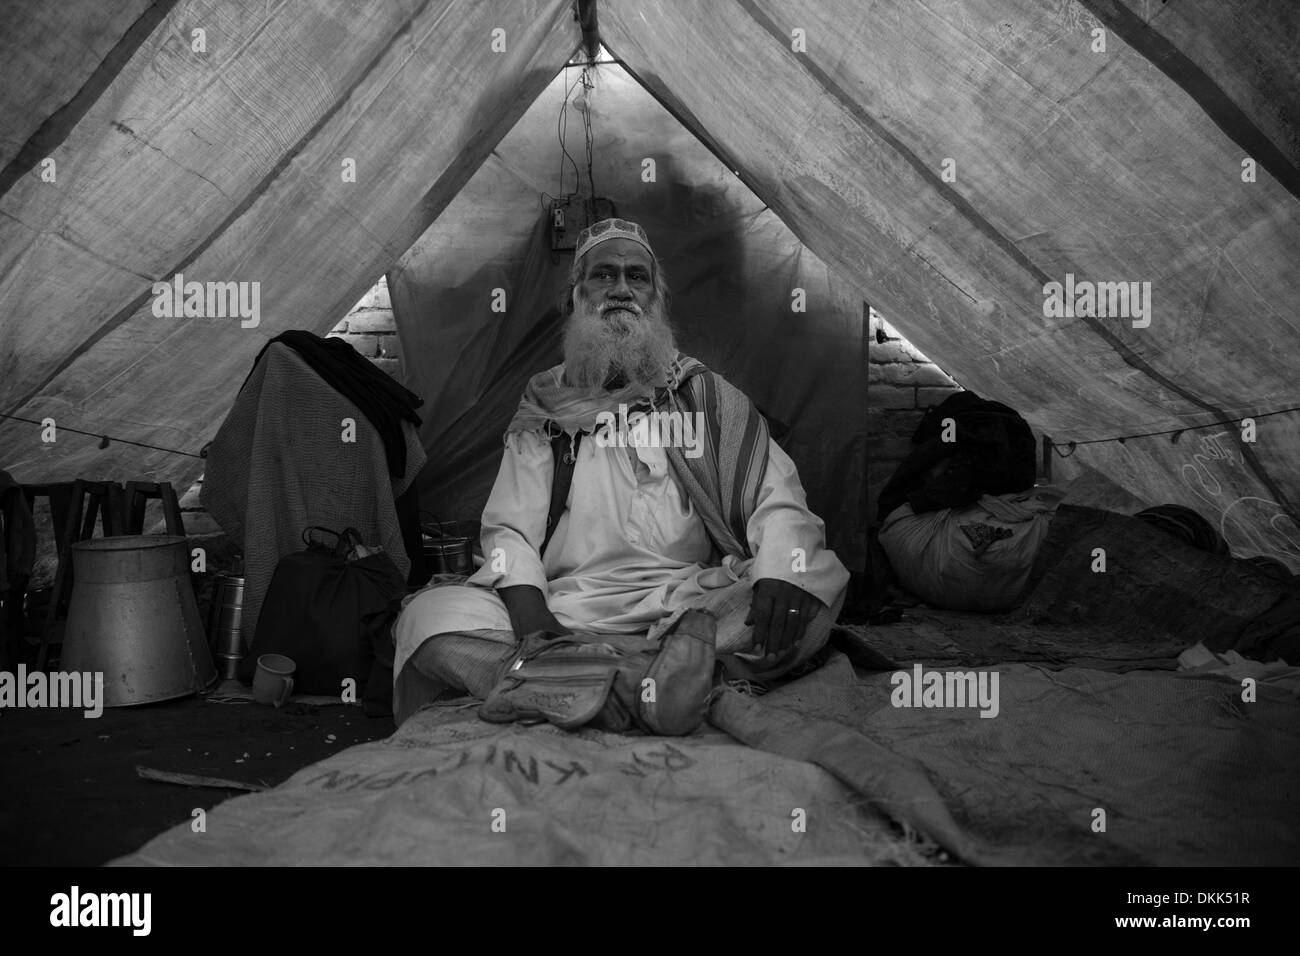 Rangpur, Bangladesh. 21st Feb, 2013. A Bihari elder sits in his makeshift tent as his home has been burnt down in an arson attack.42 years after the 1971 war there are still an estimated 600,000 Biharis (also known as 'stranded Pakistanis') living in Bangladesh. © Hanna Adcock/ZUMA Wire/ZUMAPRESS.com/Alamy Live News Stock Photo